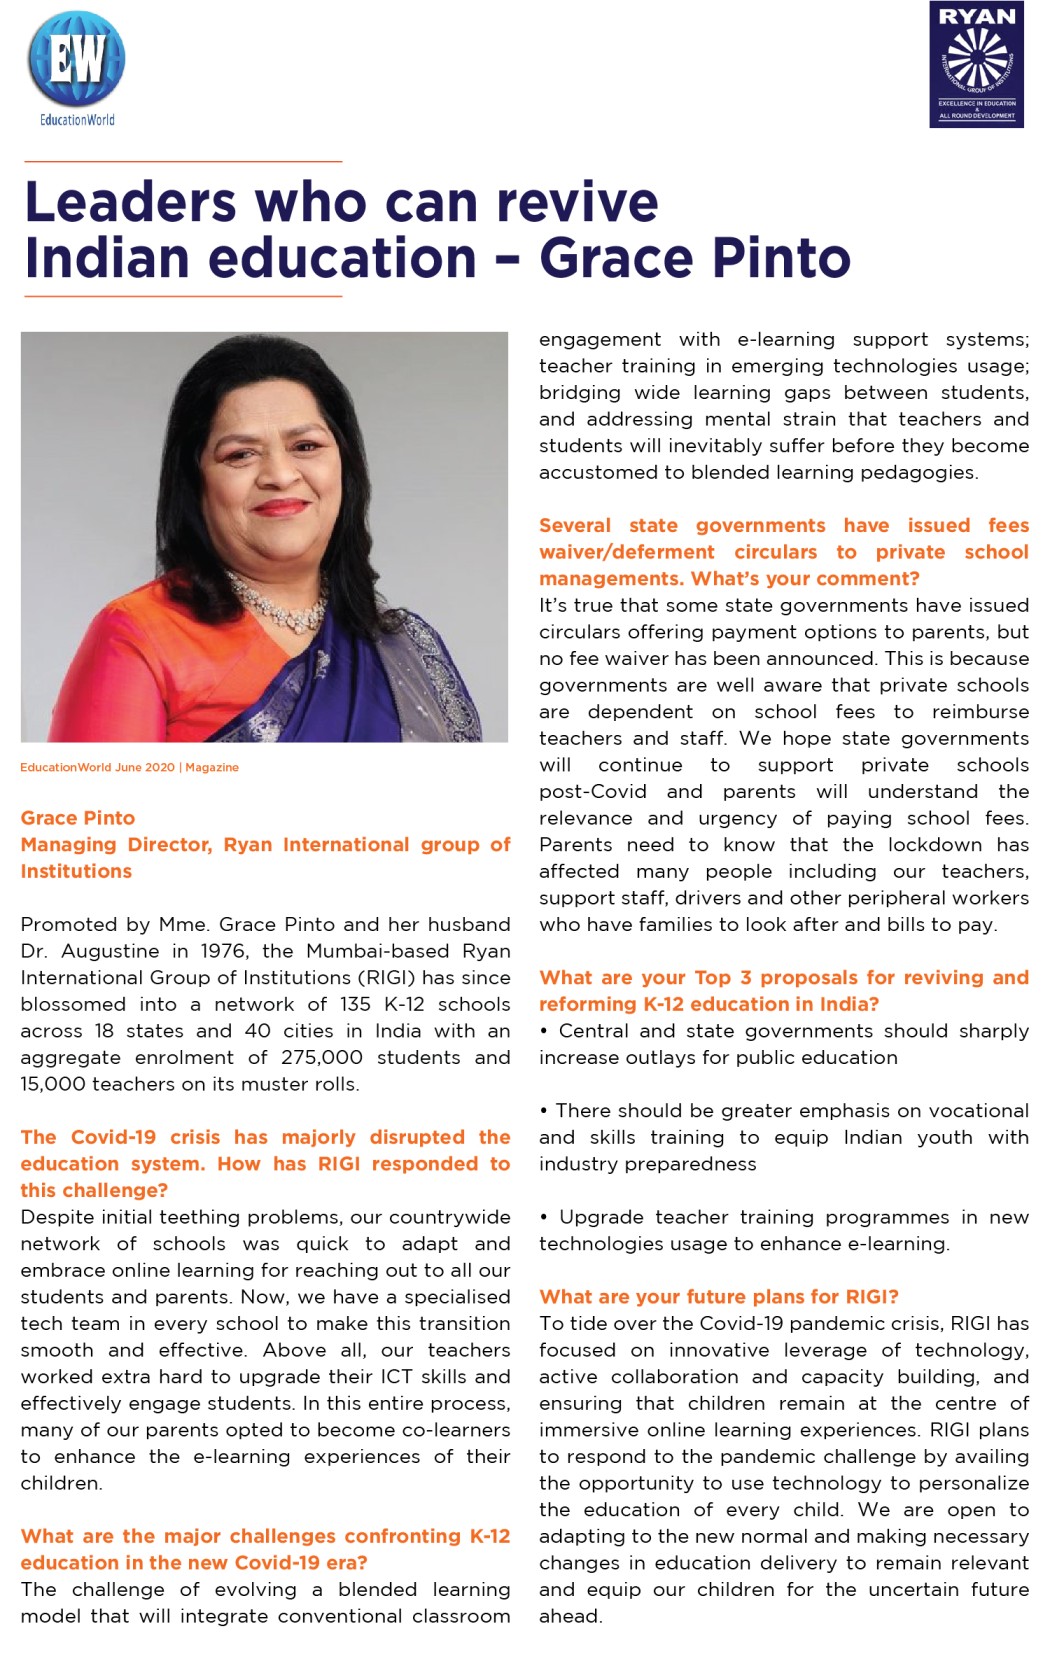 Leaders who can revive Indian Education - Madam Grace Pinto - Ryan International School Greater Noida - Ryan Group